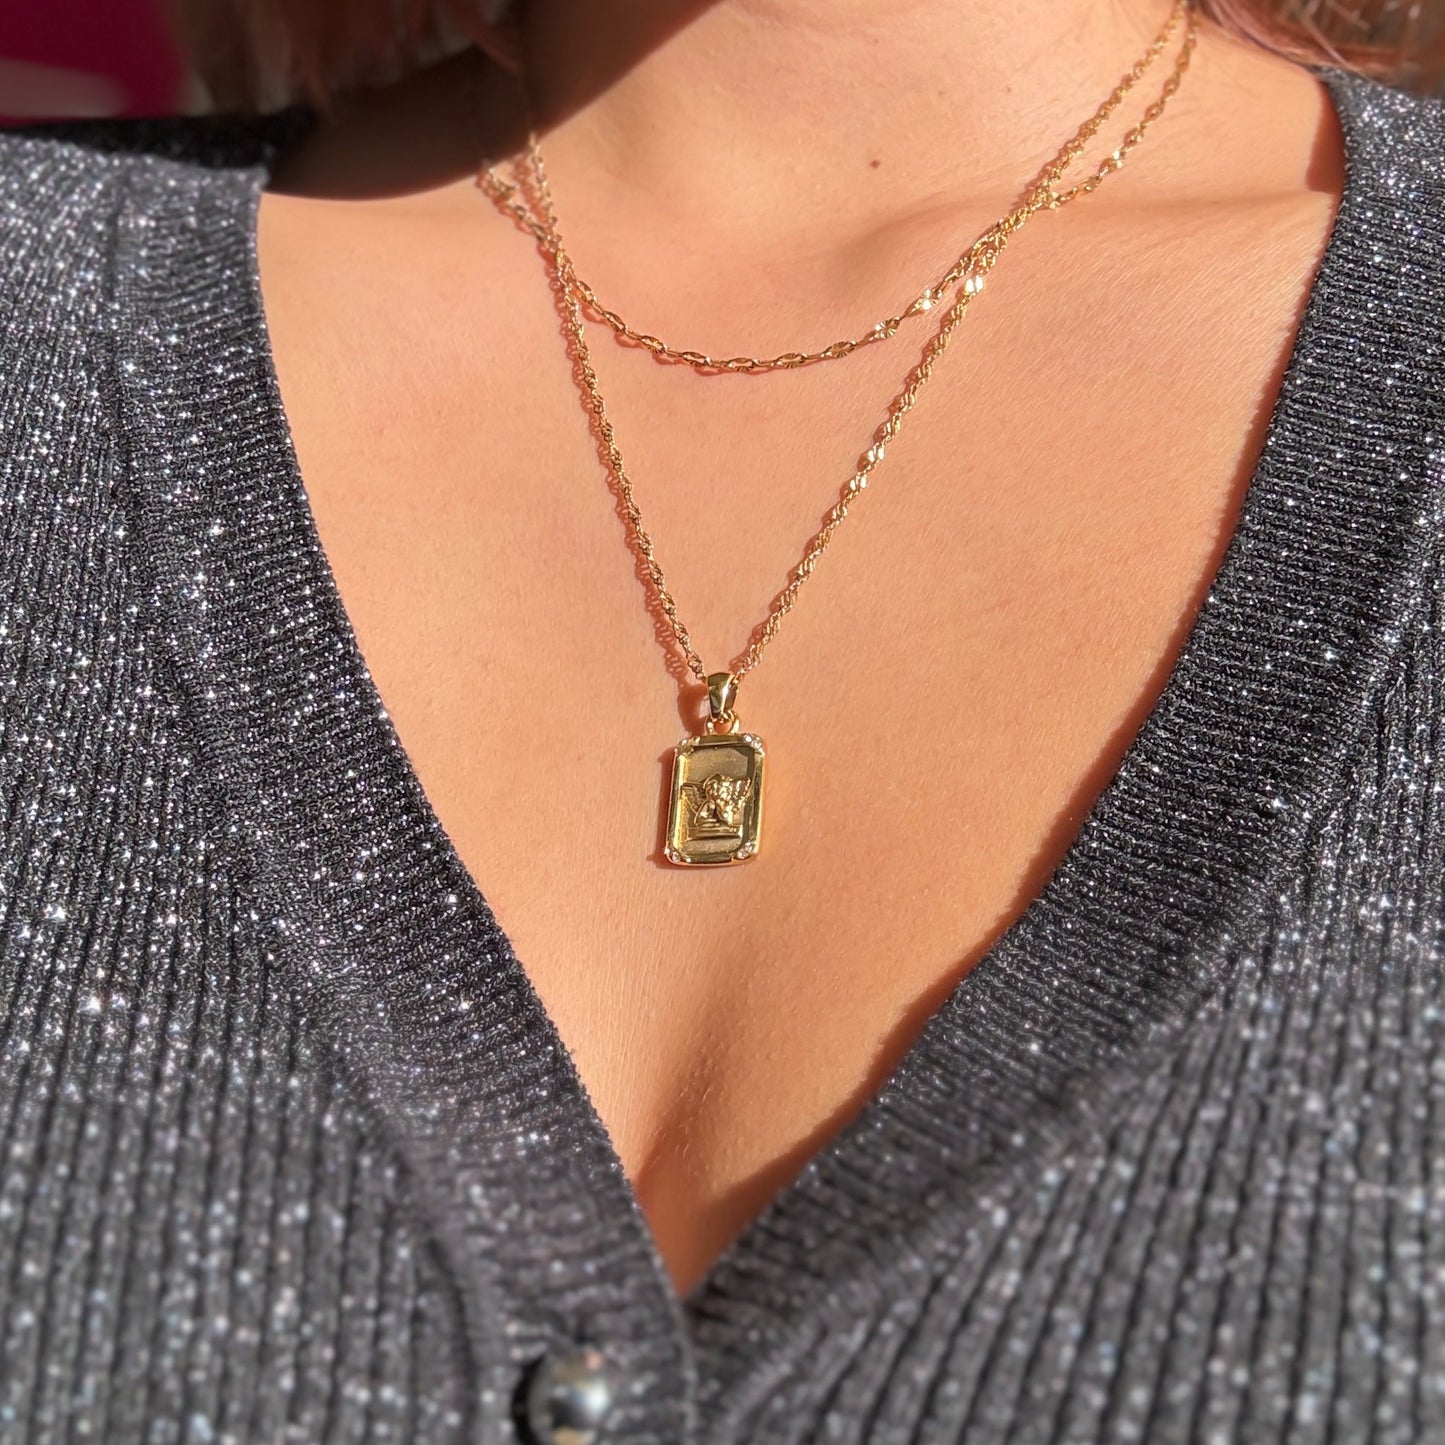 Plate angel necklace(２セット) - 𝐇𝐨𝐧𝐞𝐲 𝐁𝐮𝐭𝐭𝐞𝐫 𝐍𝐢𝐧𝐞